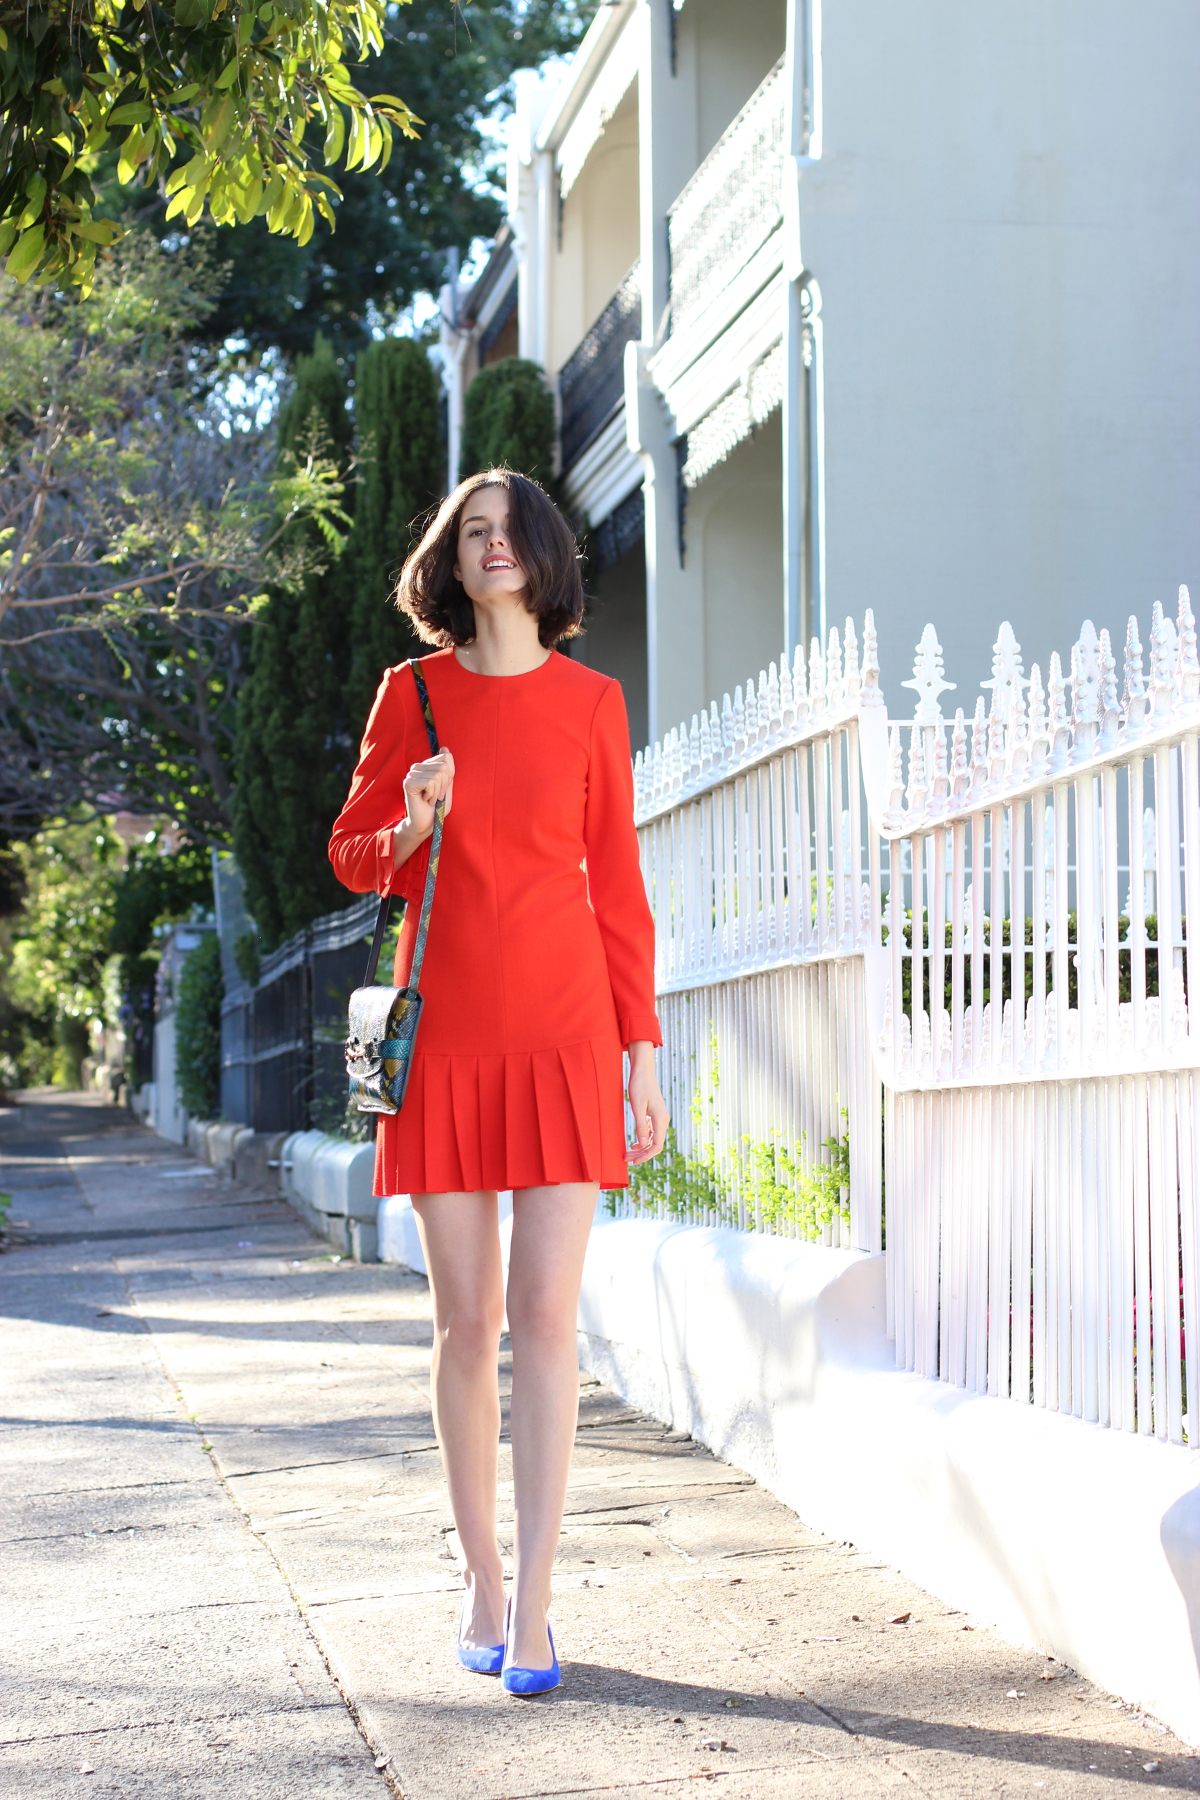 BY CHILL CHLOE HILL BLOGS Wearing Antipodium London century shift dress in flame red, with gucci blue and yellow shoulder bag and Nicholas Kirkwood electric blue heels